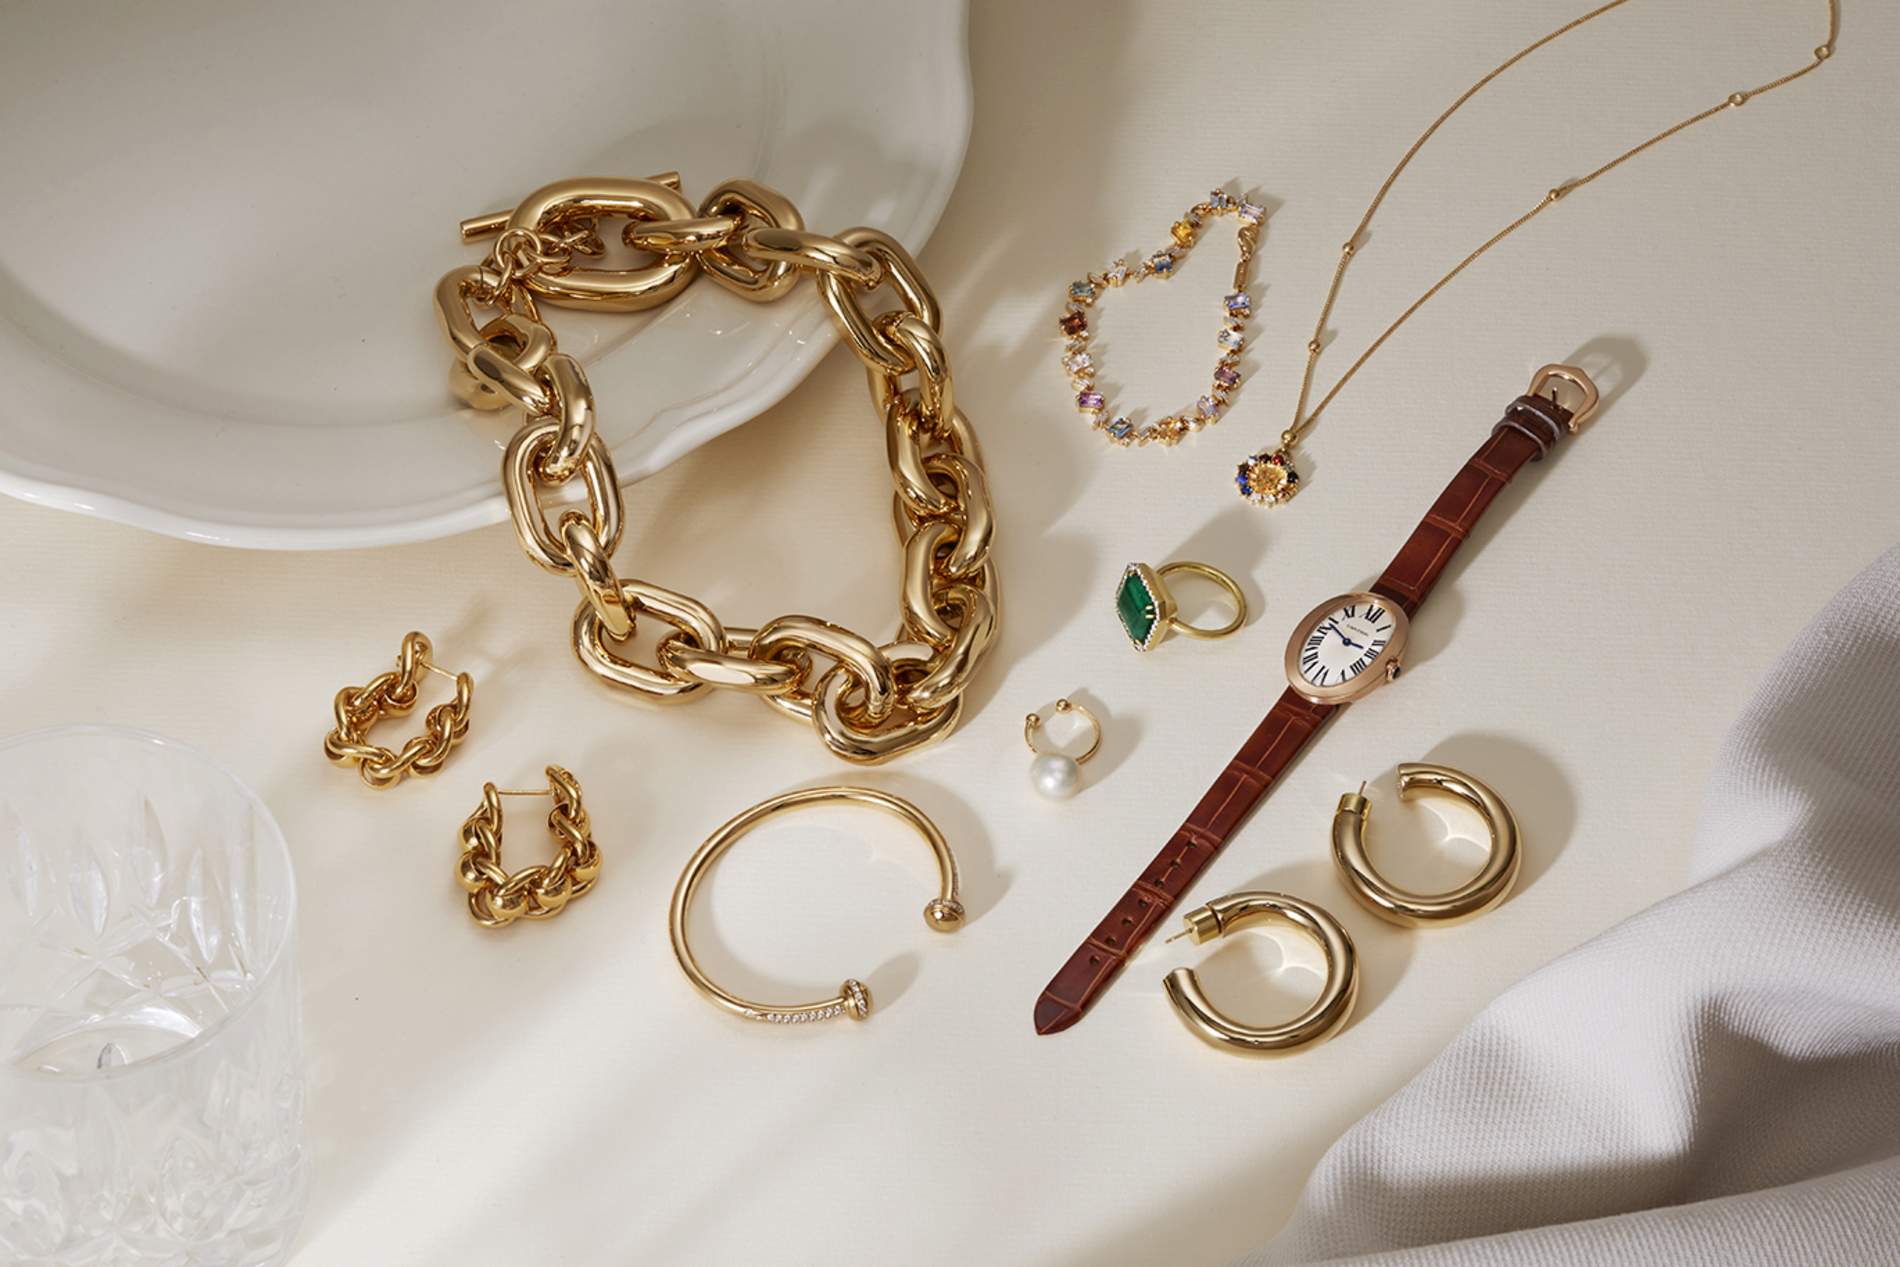 10 CLASSIC JEWELRY PIECES TO INVEST IN